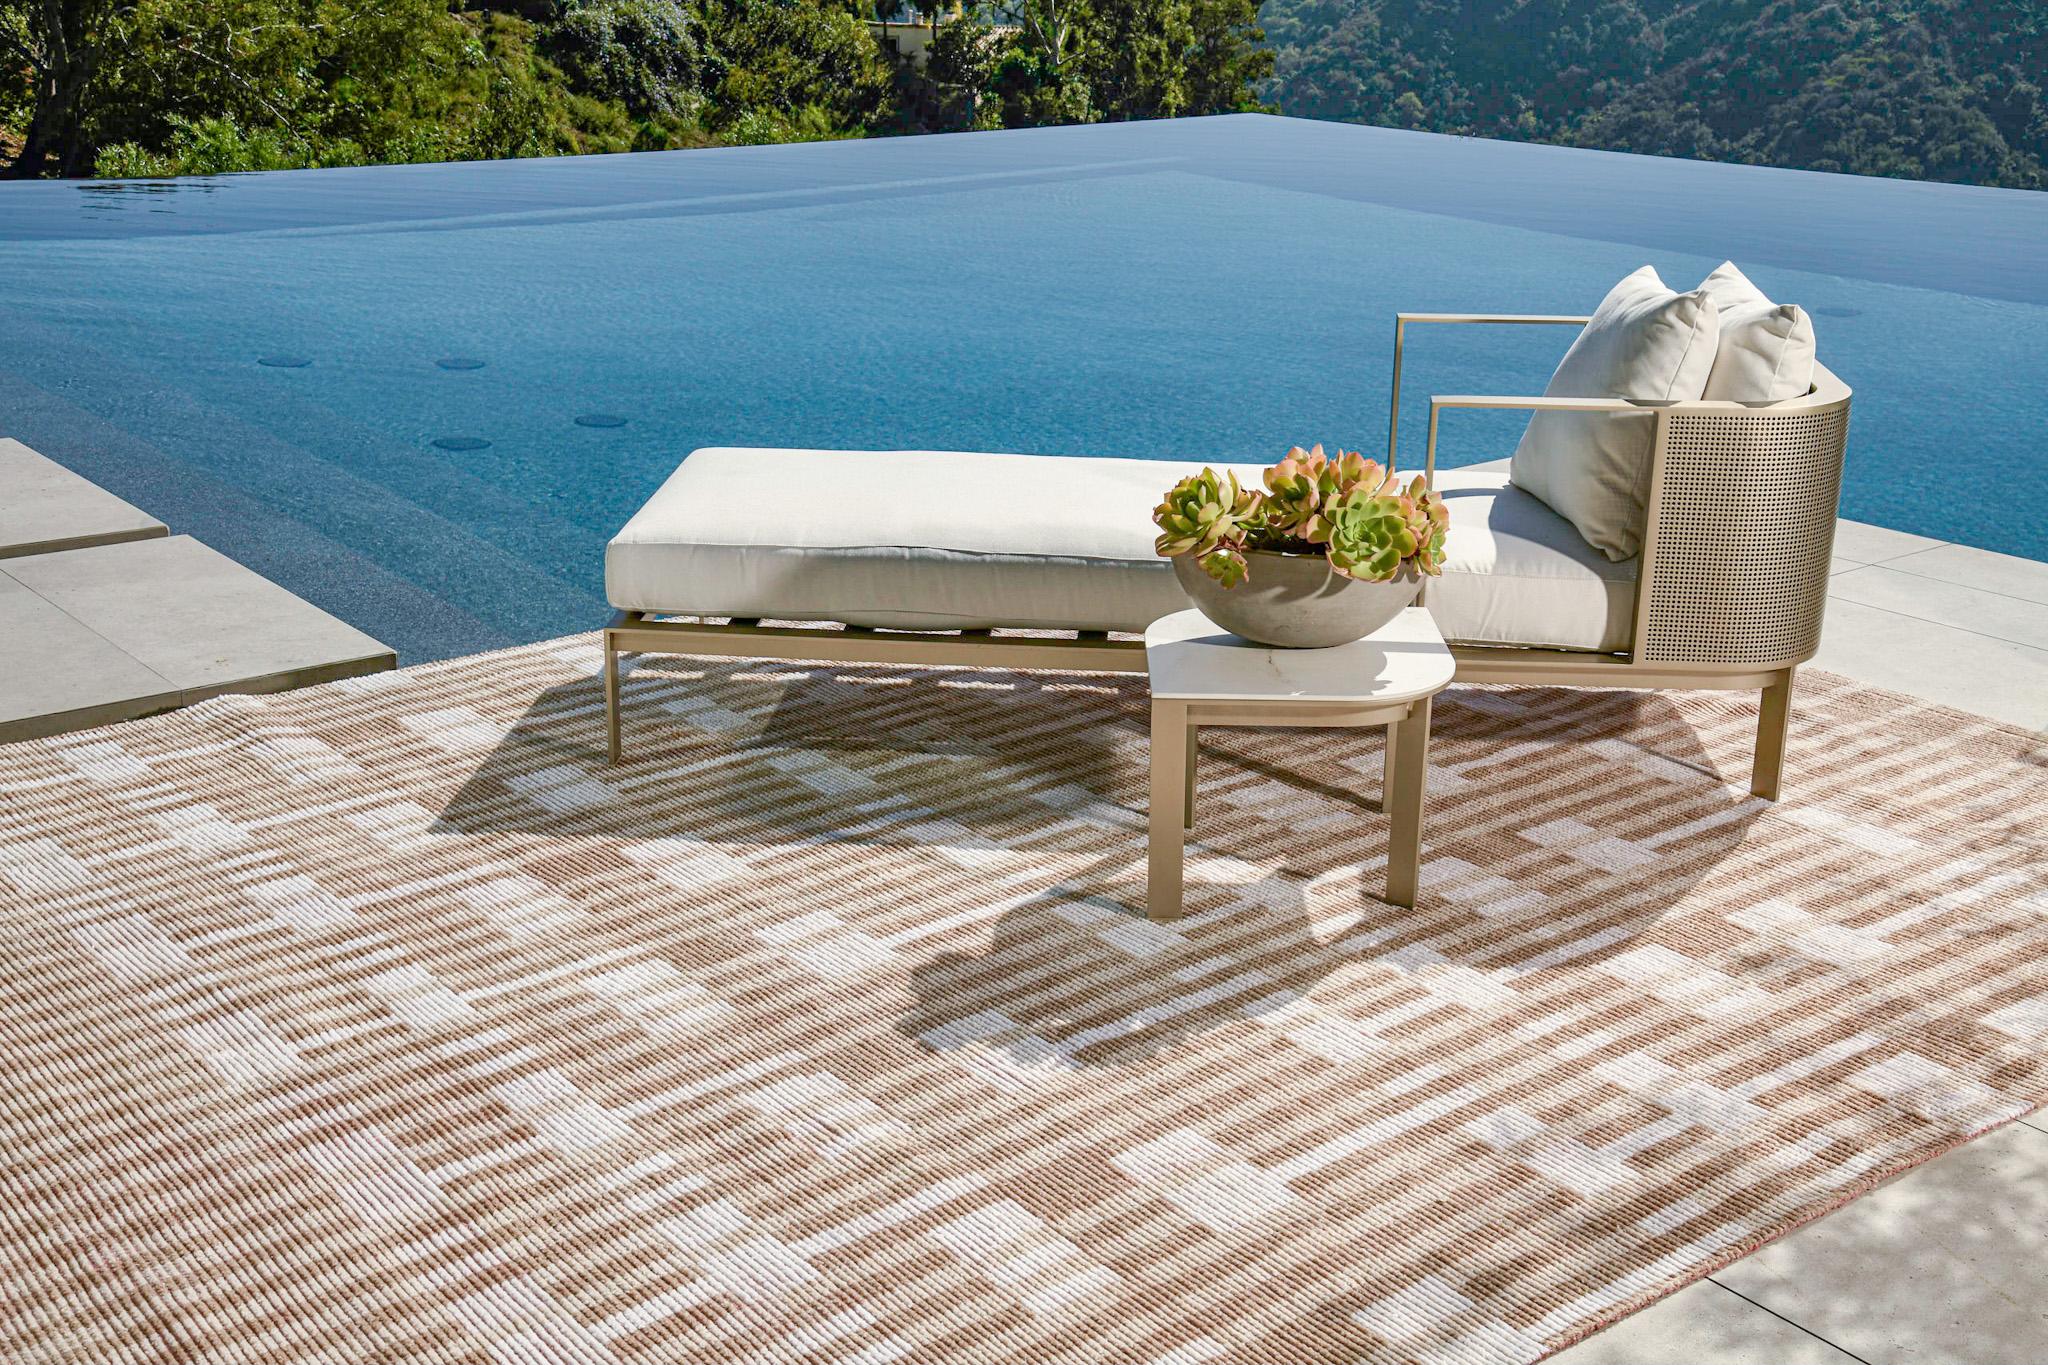 Enjoy the fresh air with Nasim, rugs that work indoors and out.

Rug Number
31427
Size
9' 1